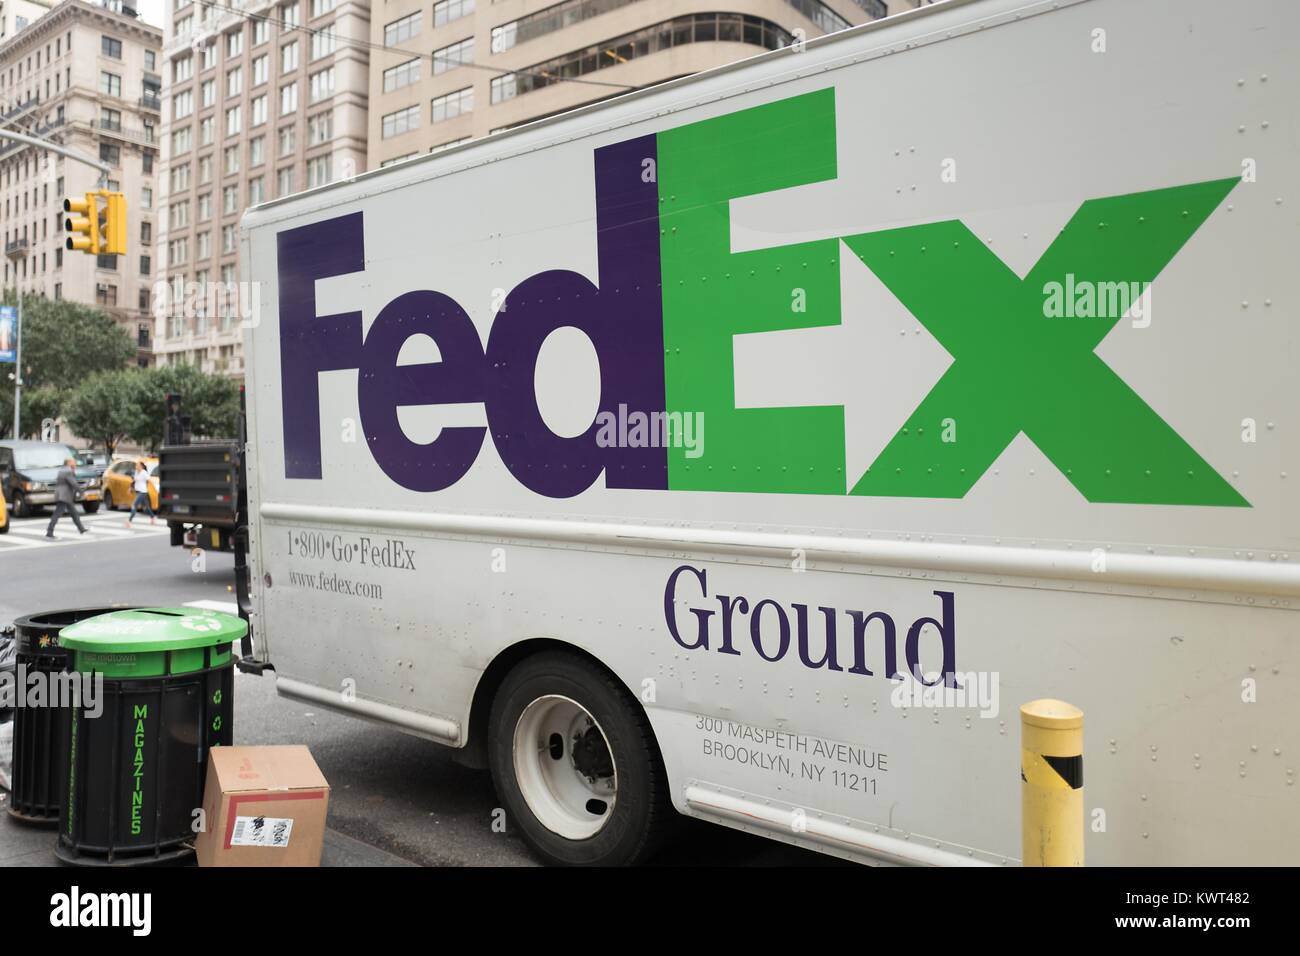 Logo on the side of a Federal Express (FedEx) ground delivery truck parked on the Upper East Side of Manhattan, New York City, New York, September 14, 2017. Stock Photo